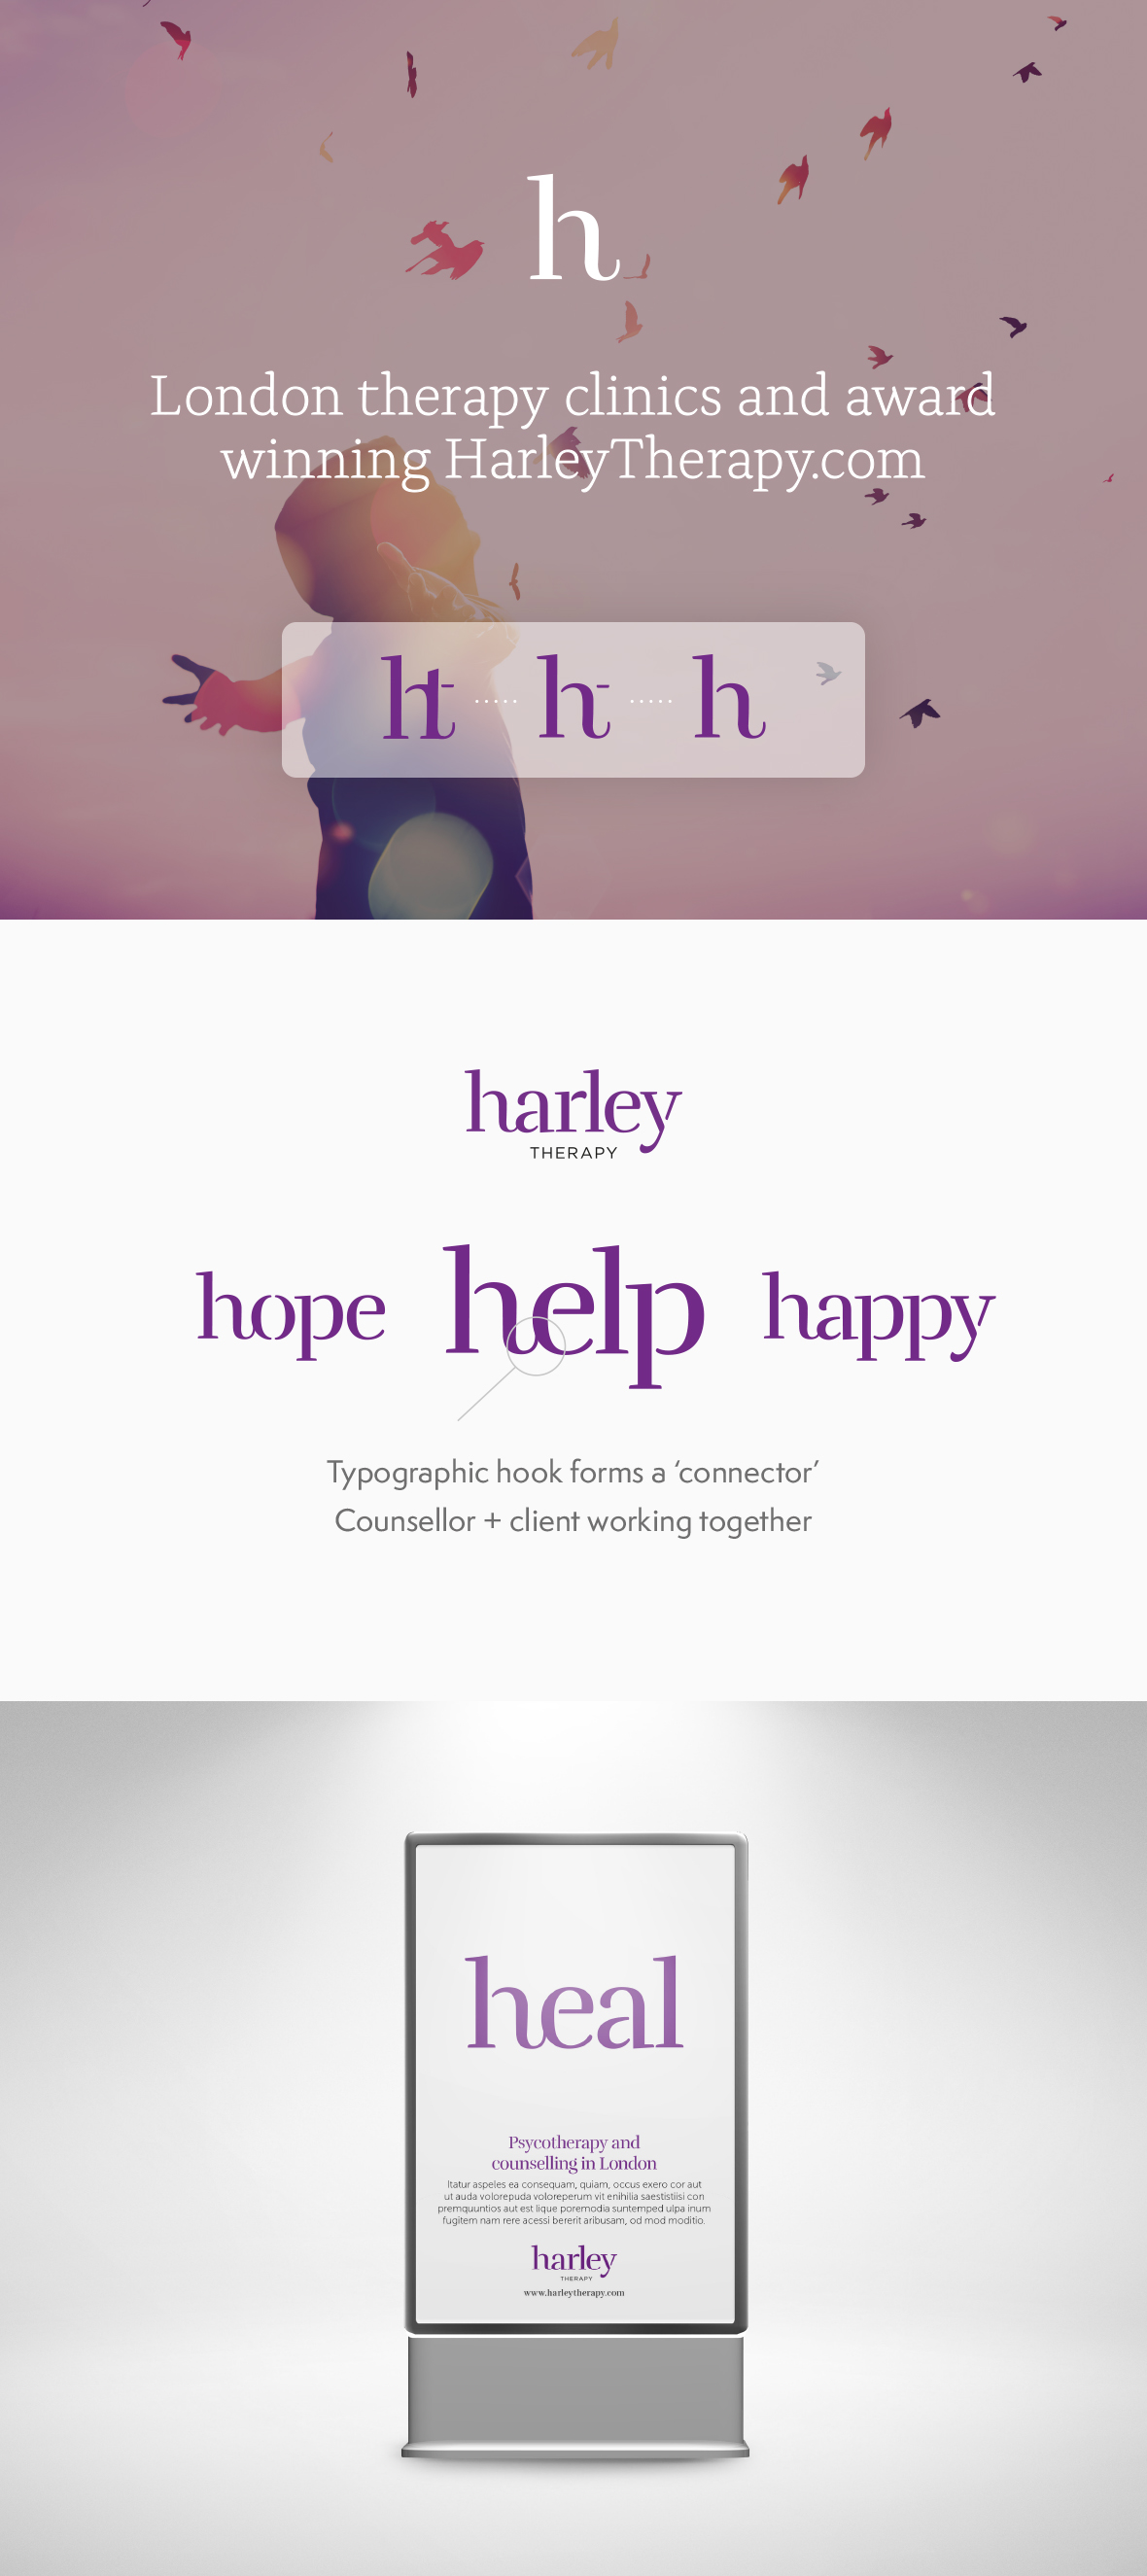 Harley Therapy branding